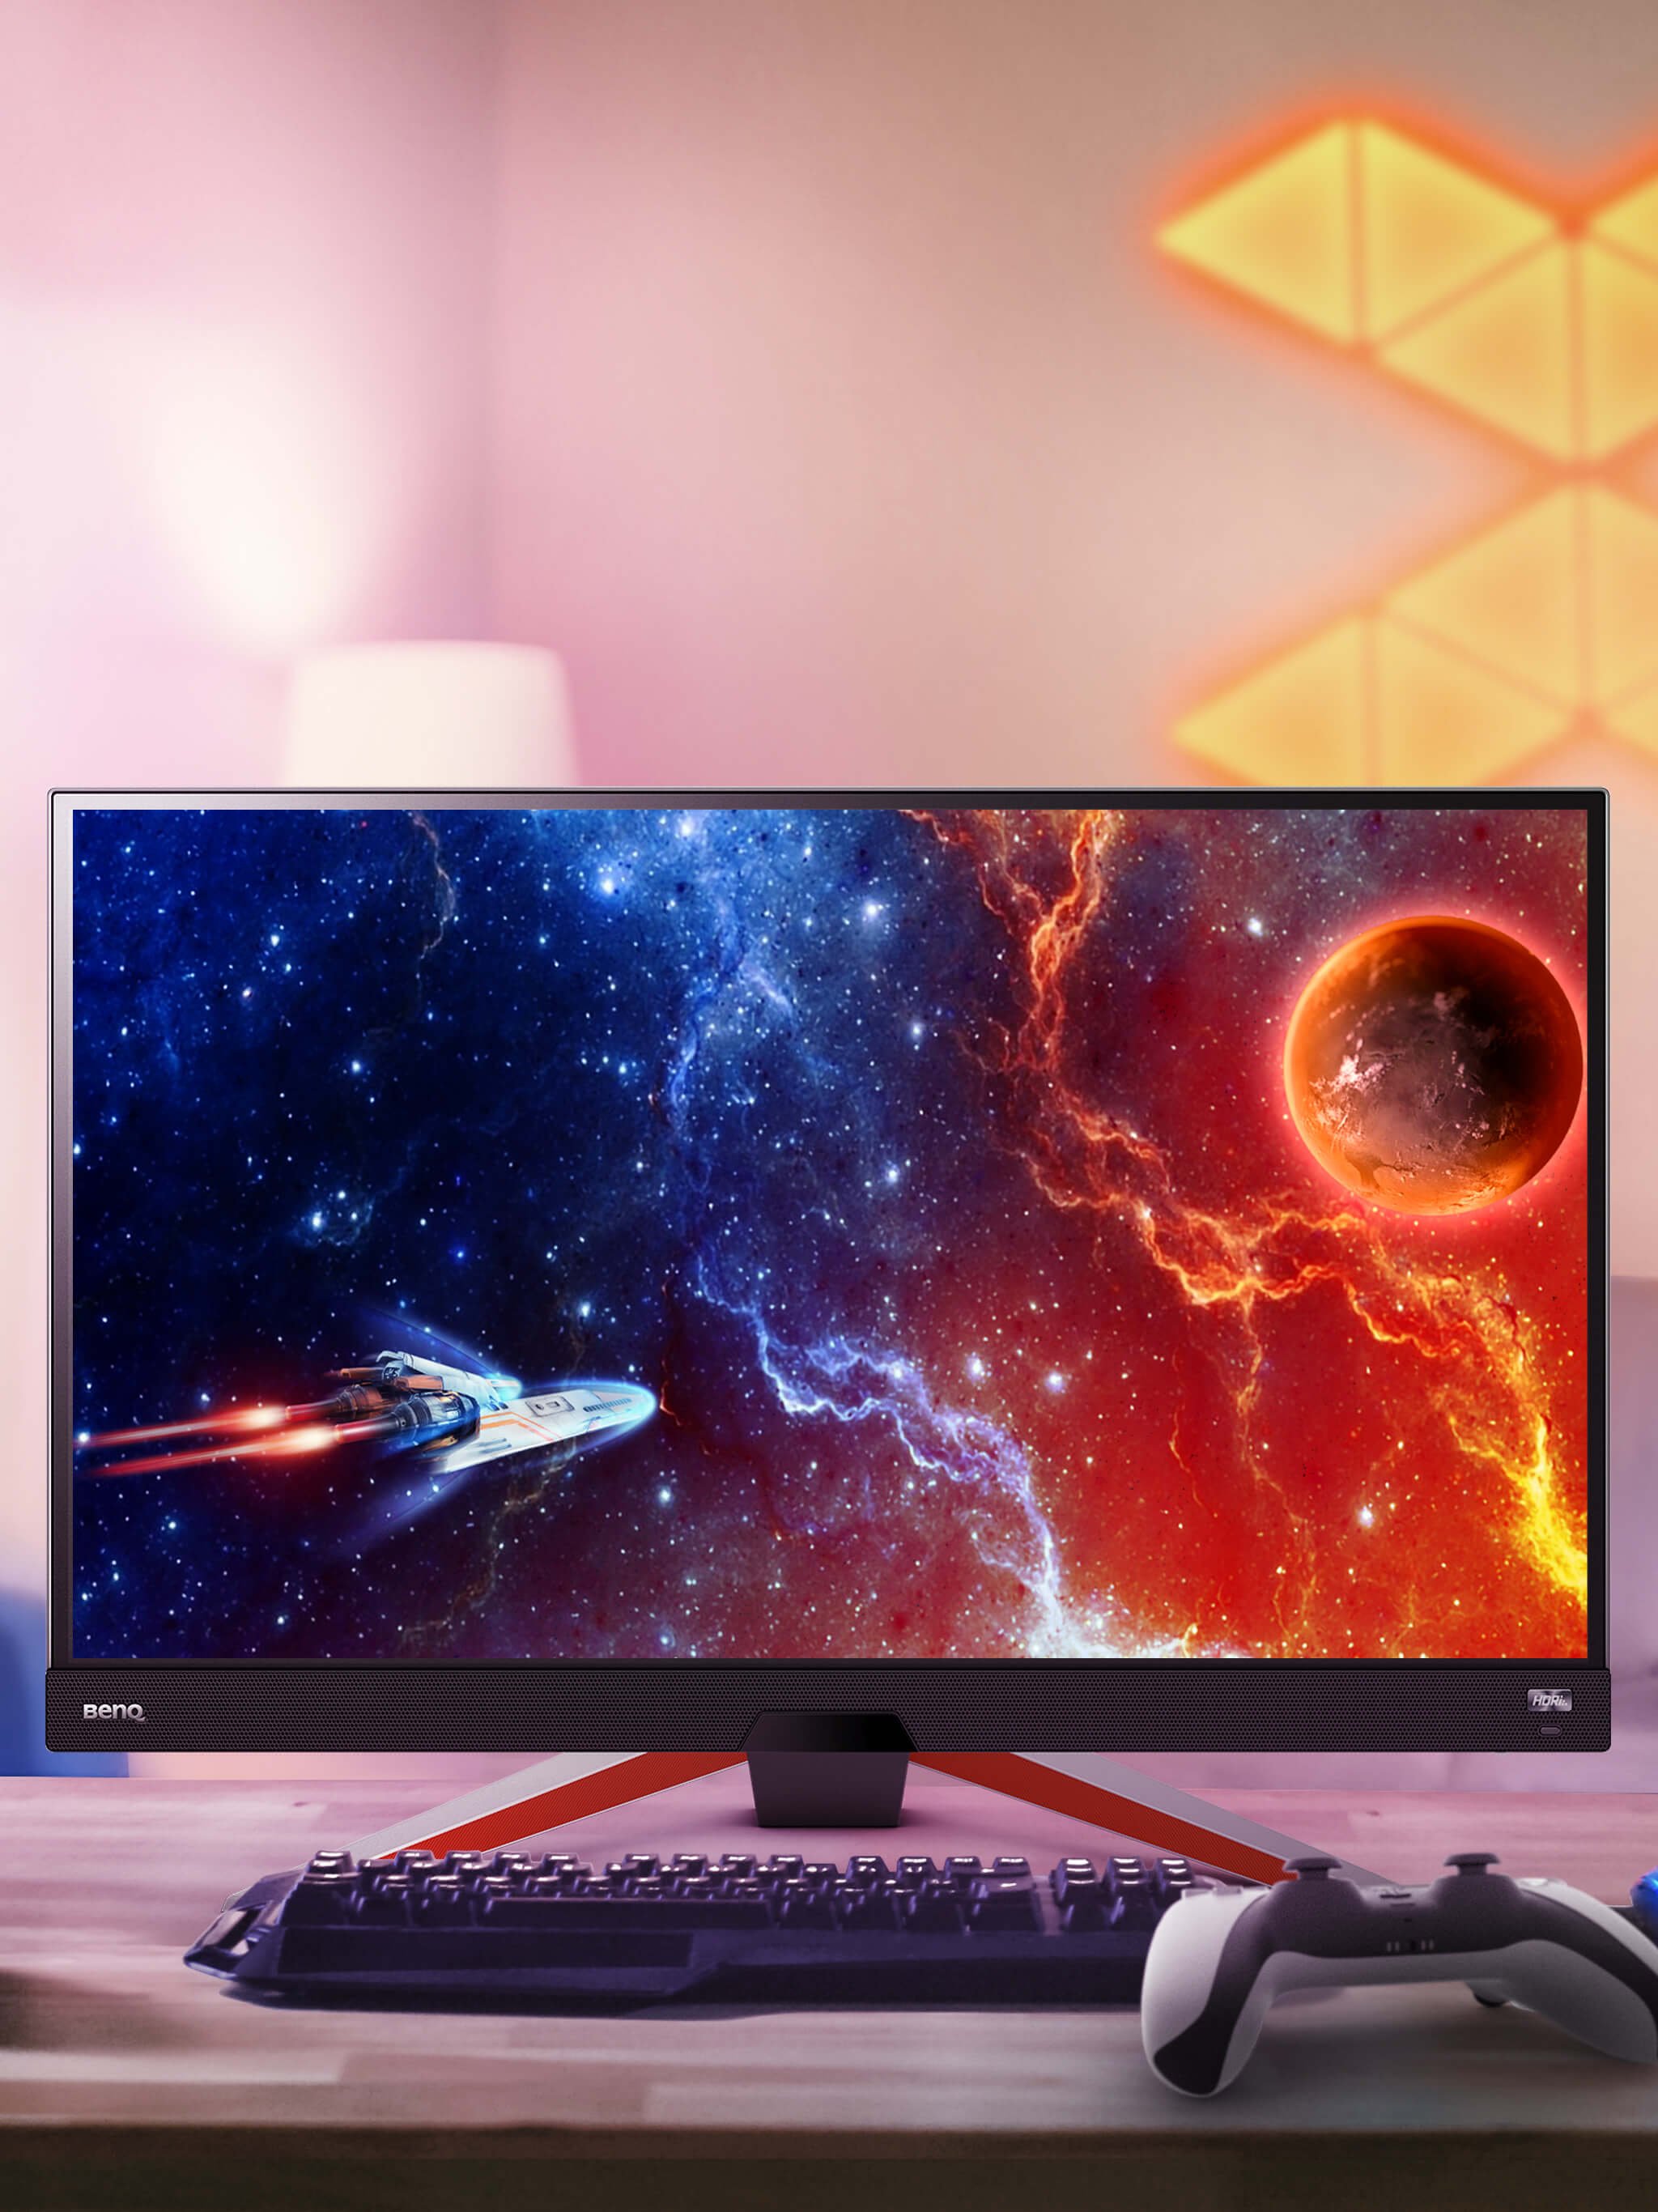 Reviews of ex3410r monitor